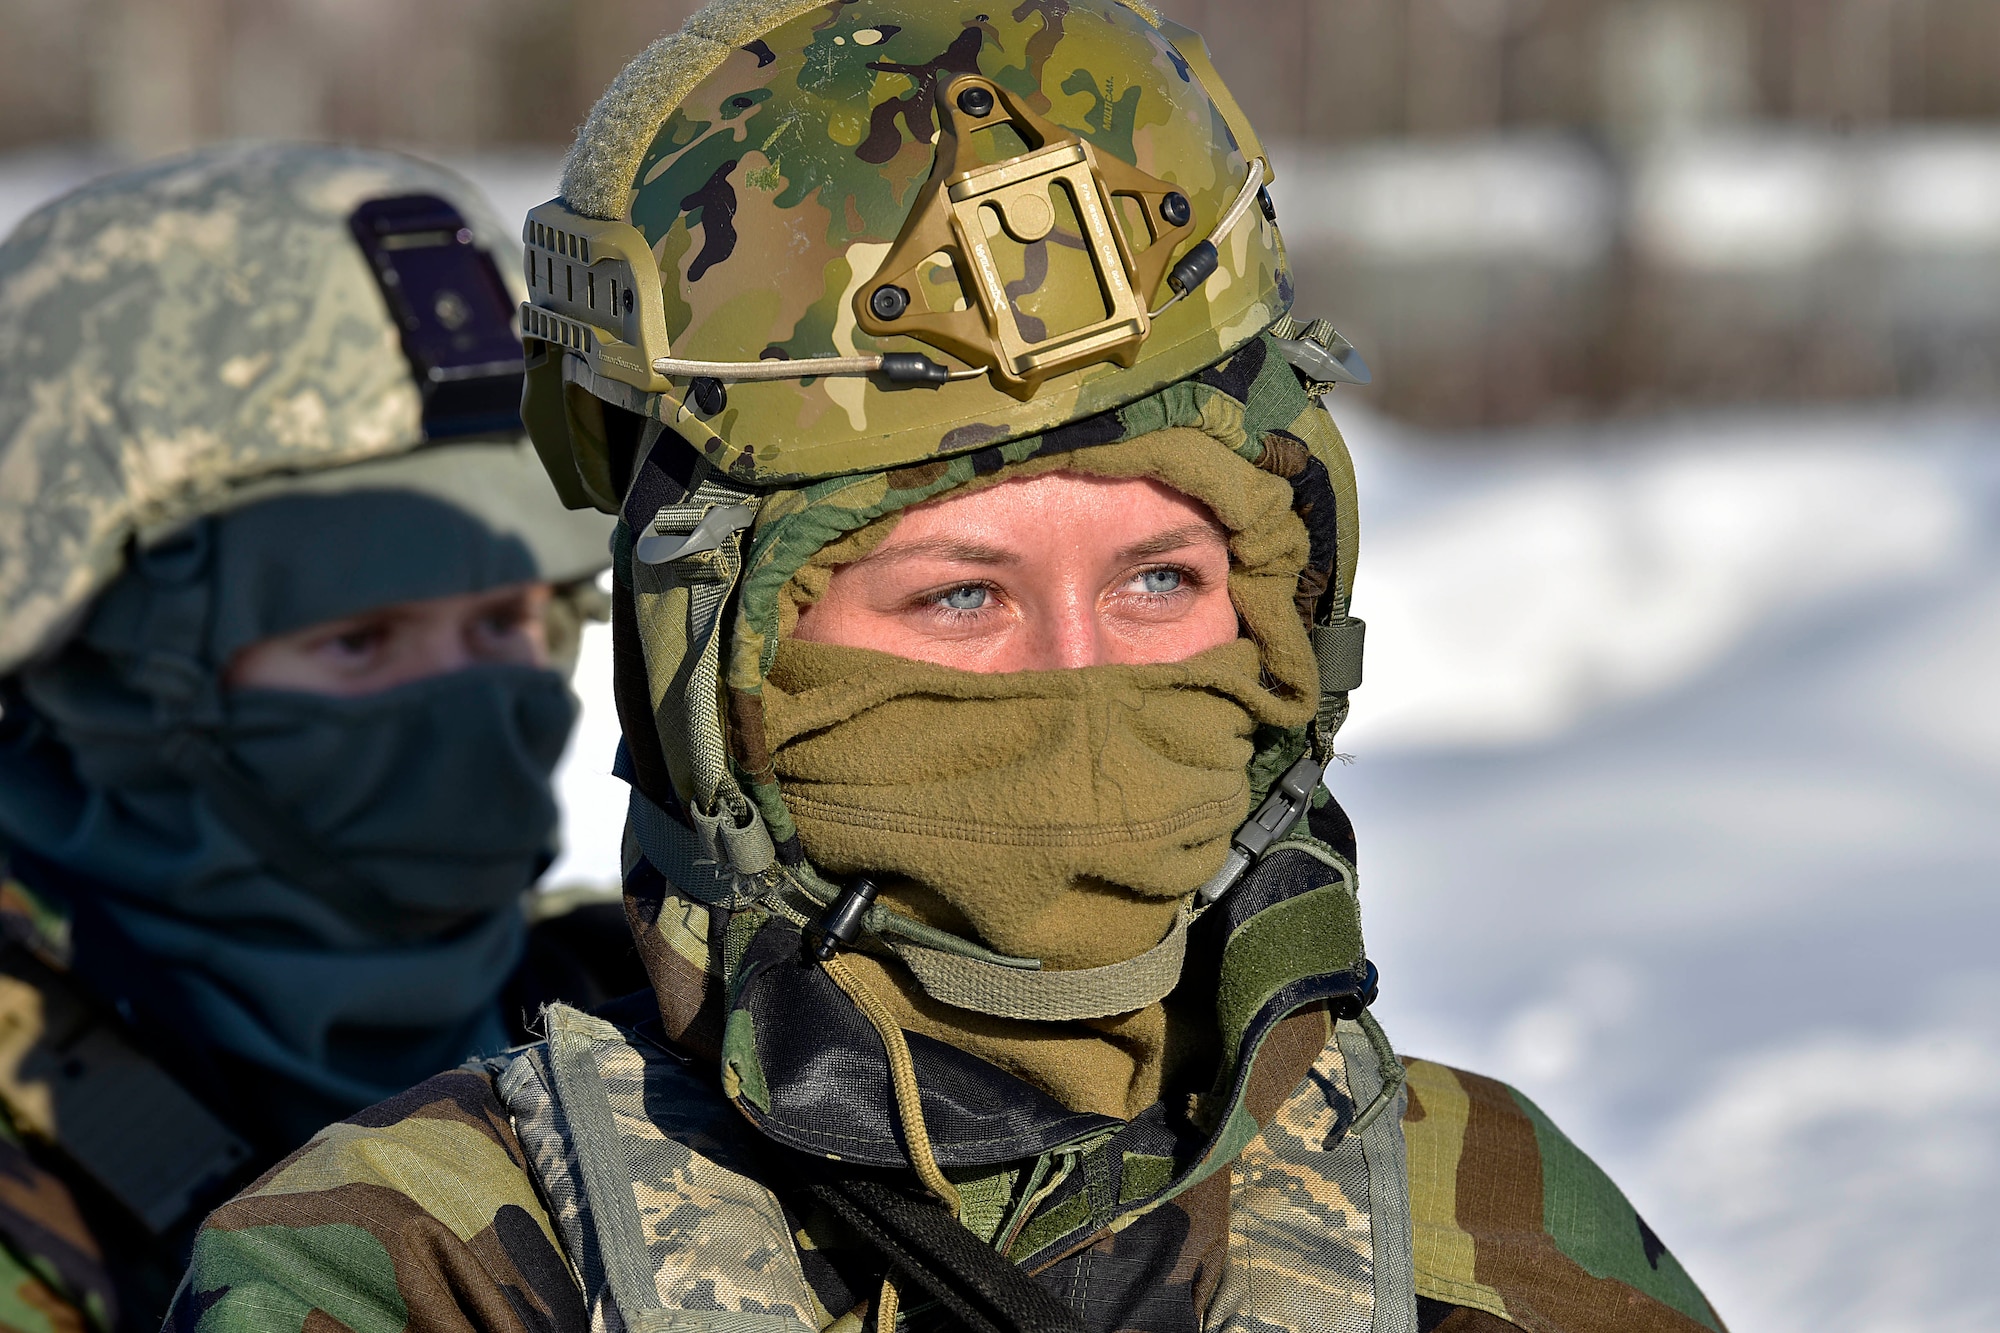 Senior Airman Sierra Warriner, 354th Security Forces Squadron installation entry controller, listens to a brief during a medical evacuation exercise on Eielson Air Force Base, Alaska, Feb. 26, 2020. Defenders donned cold-weather and mission oriented protective posture (MOPP) gear as part of the exercise. (U.S. Air Force photo by Senior Airman Beaux Hebert)